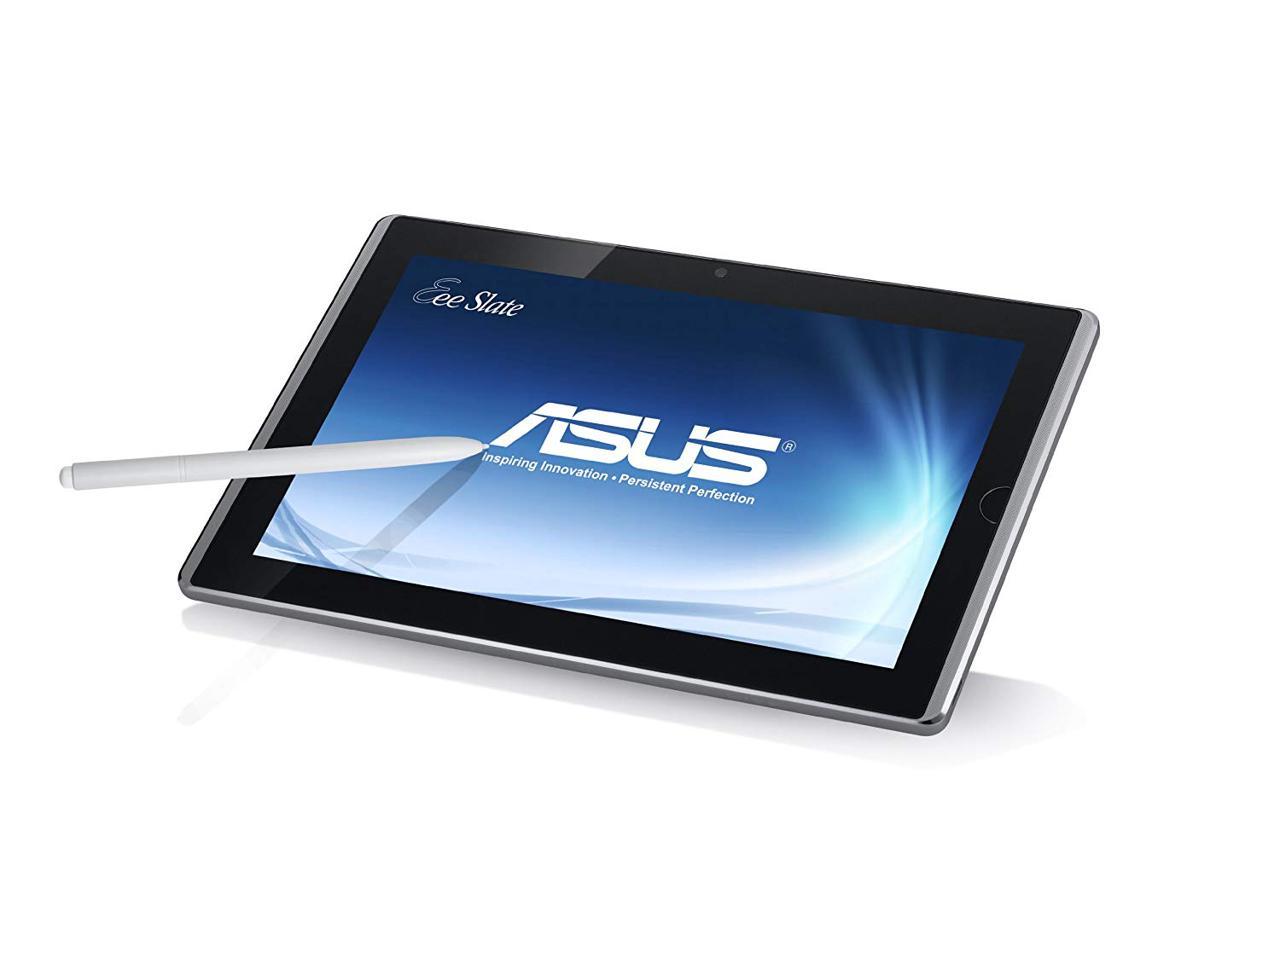 ASUS Eee Slate B121-A1 12.1-Inch Tablet PC - White